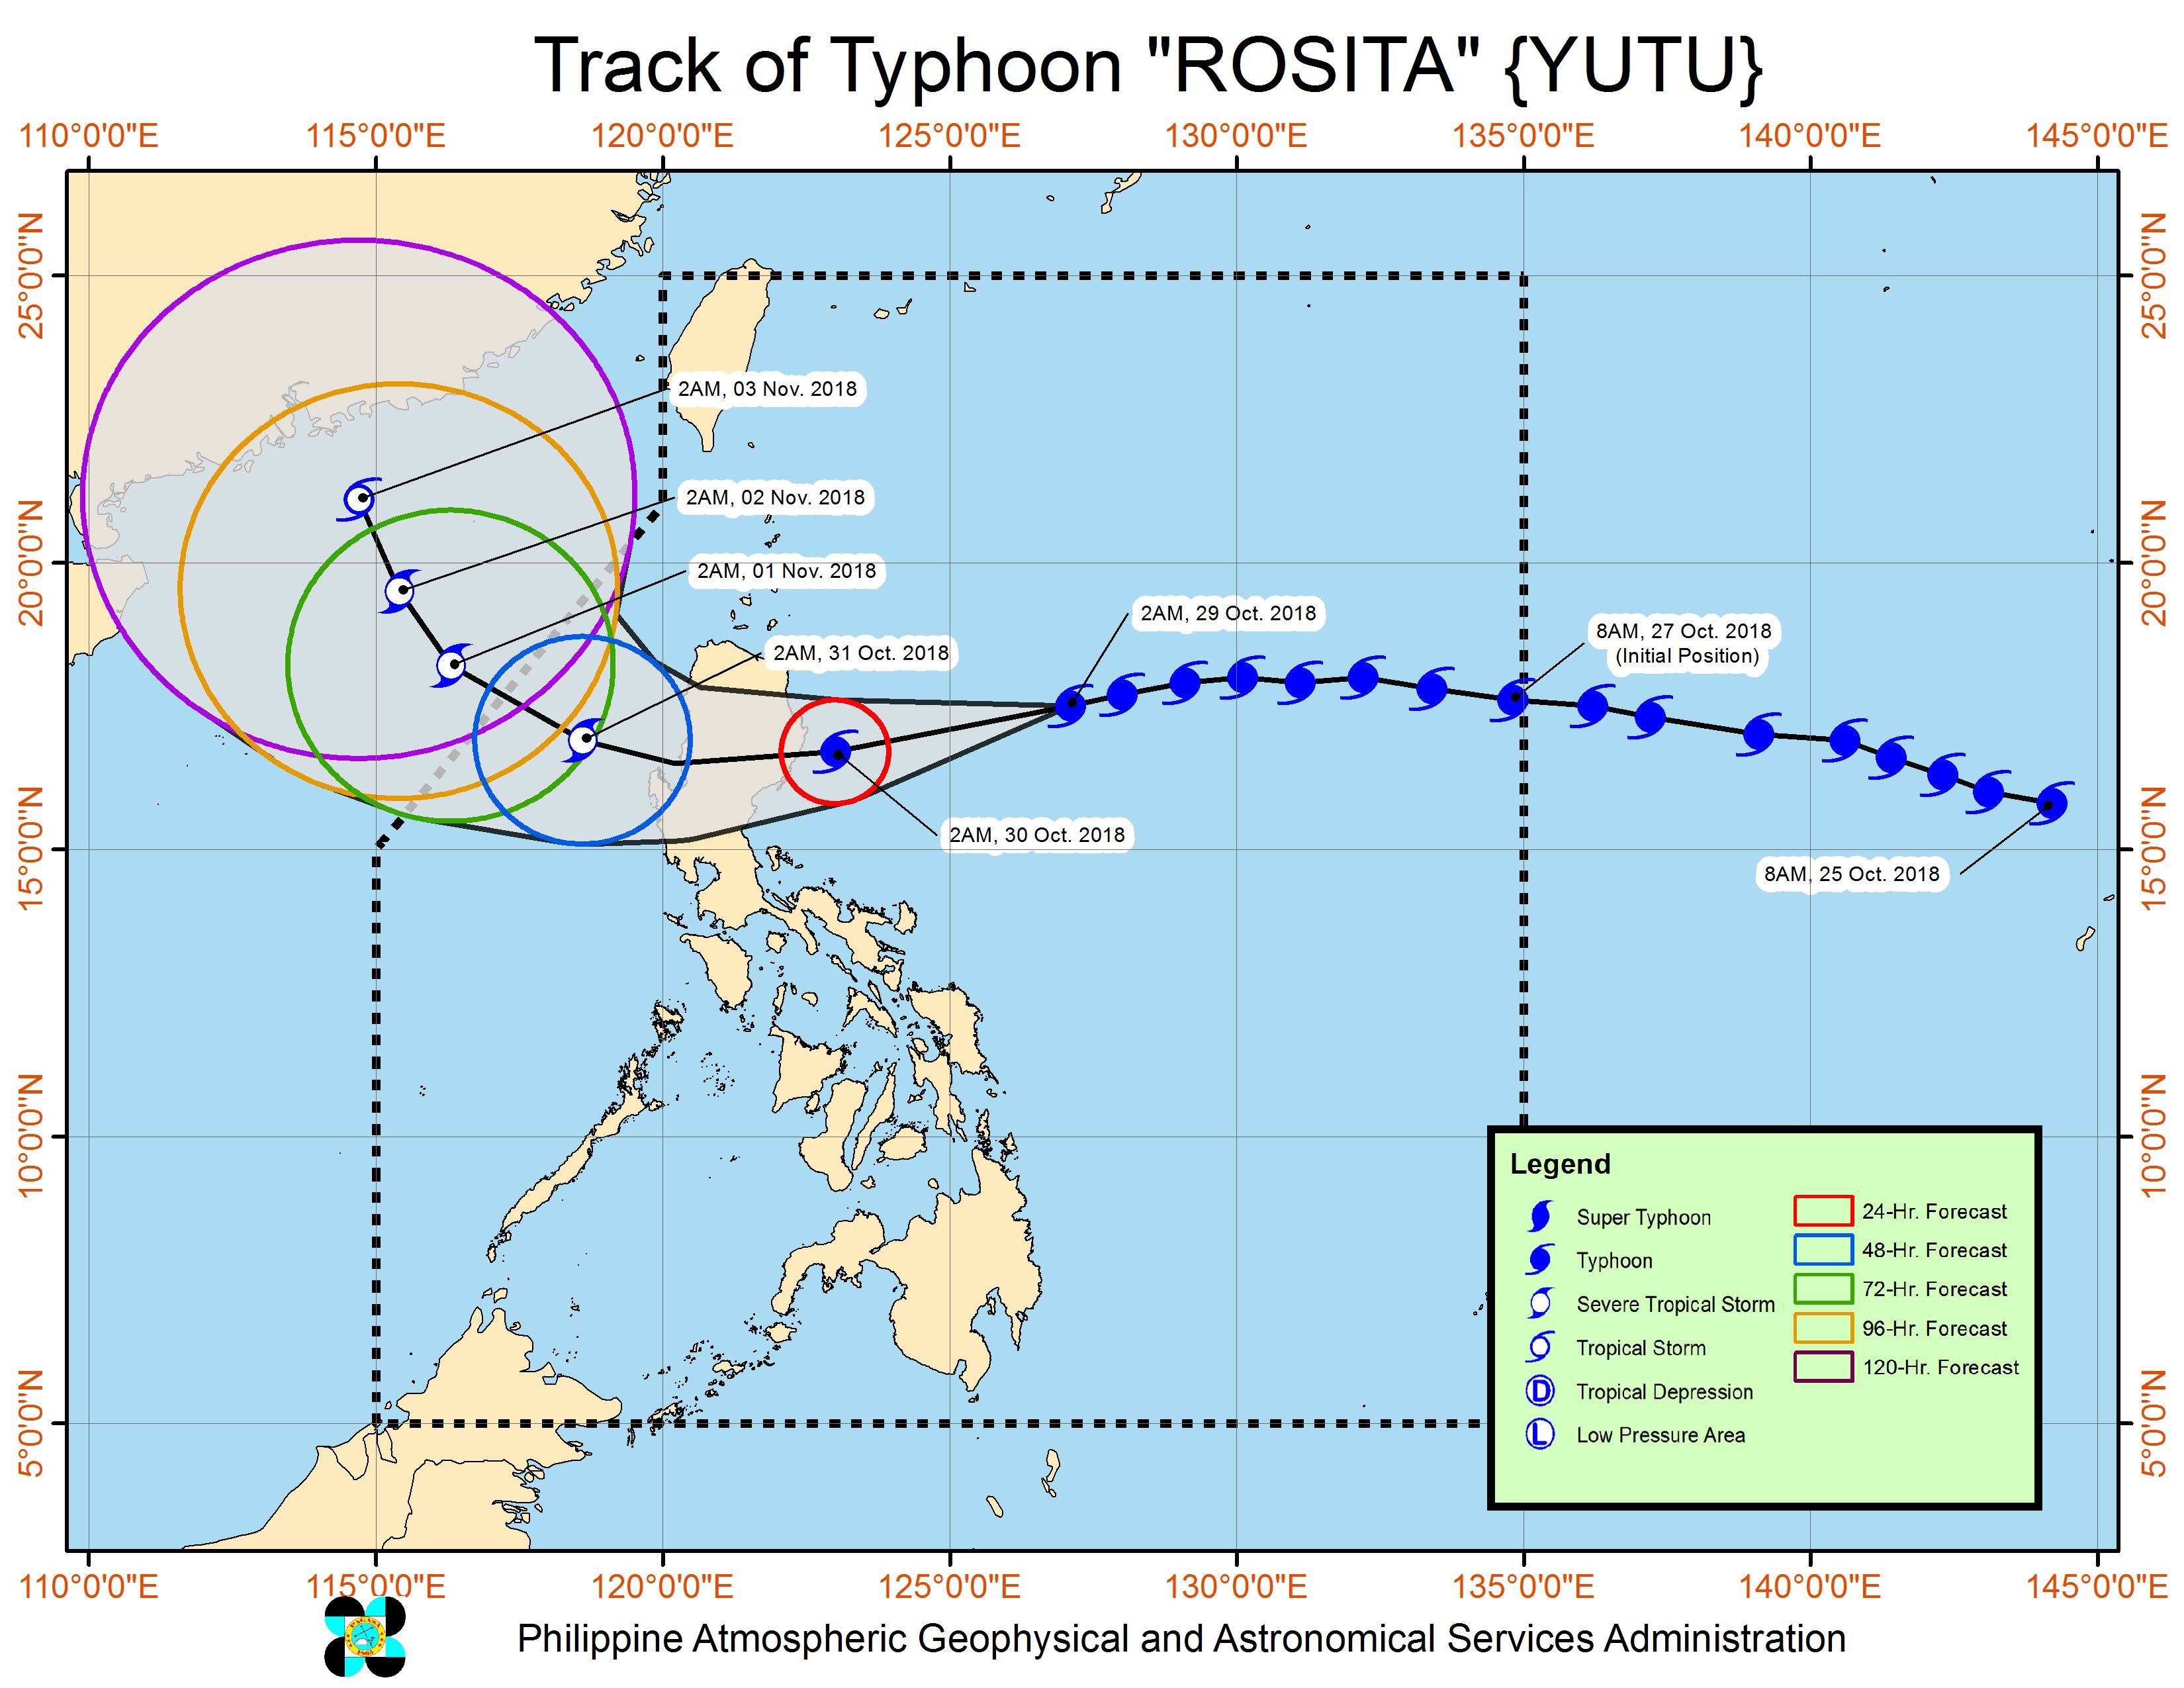 Forecast track of Typhoon Rosita (Yutu) as of October 29, 2018, 5 am. Image from PAGASA 